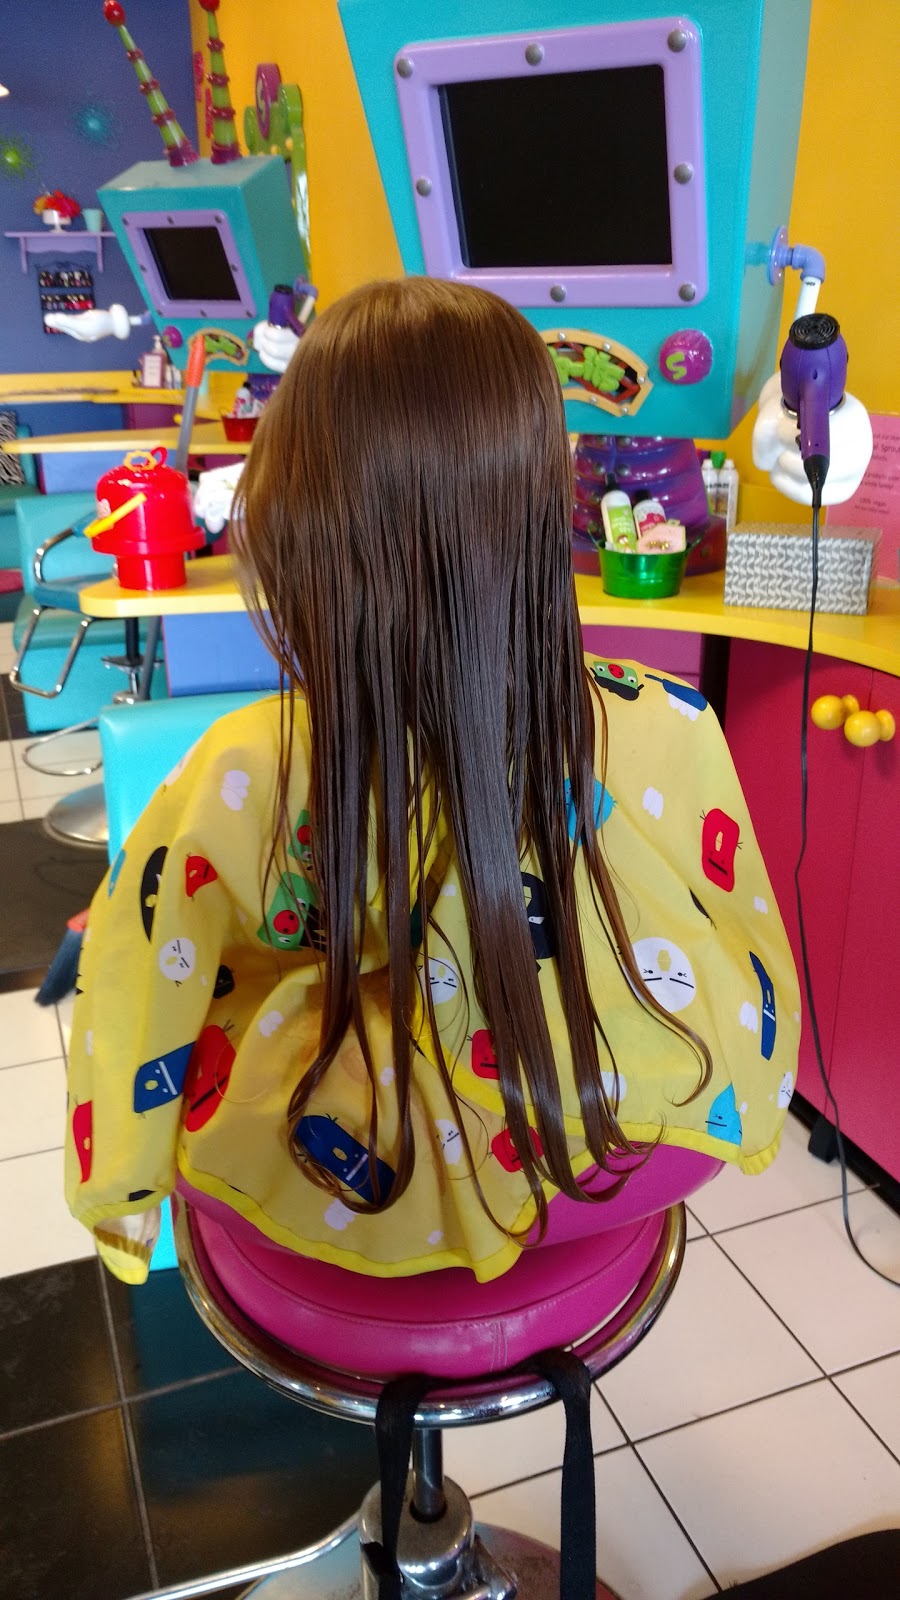 Snip-its Haircuts for Kids | 405 Queen St, Southington, CT 06489 | Phone: (860) 621-6762